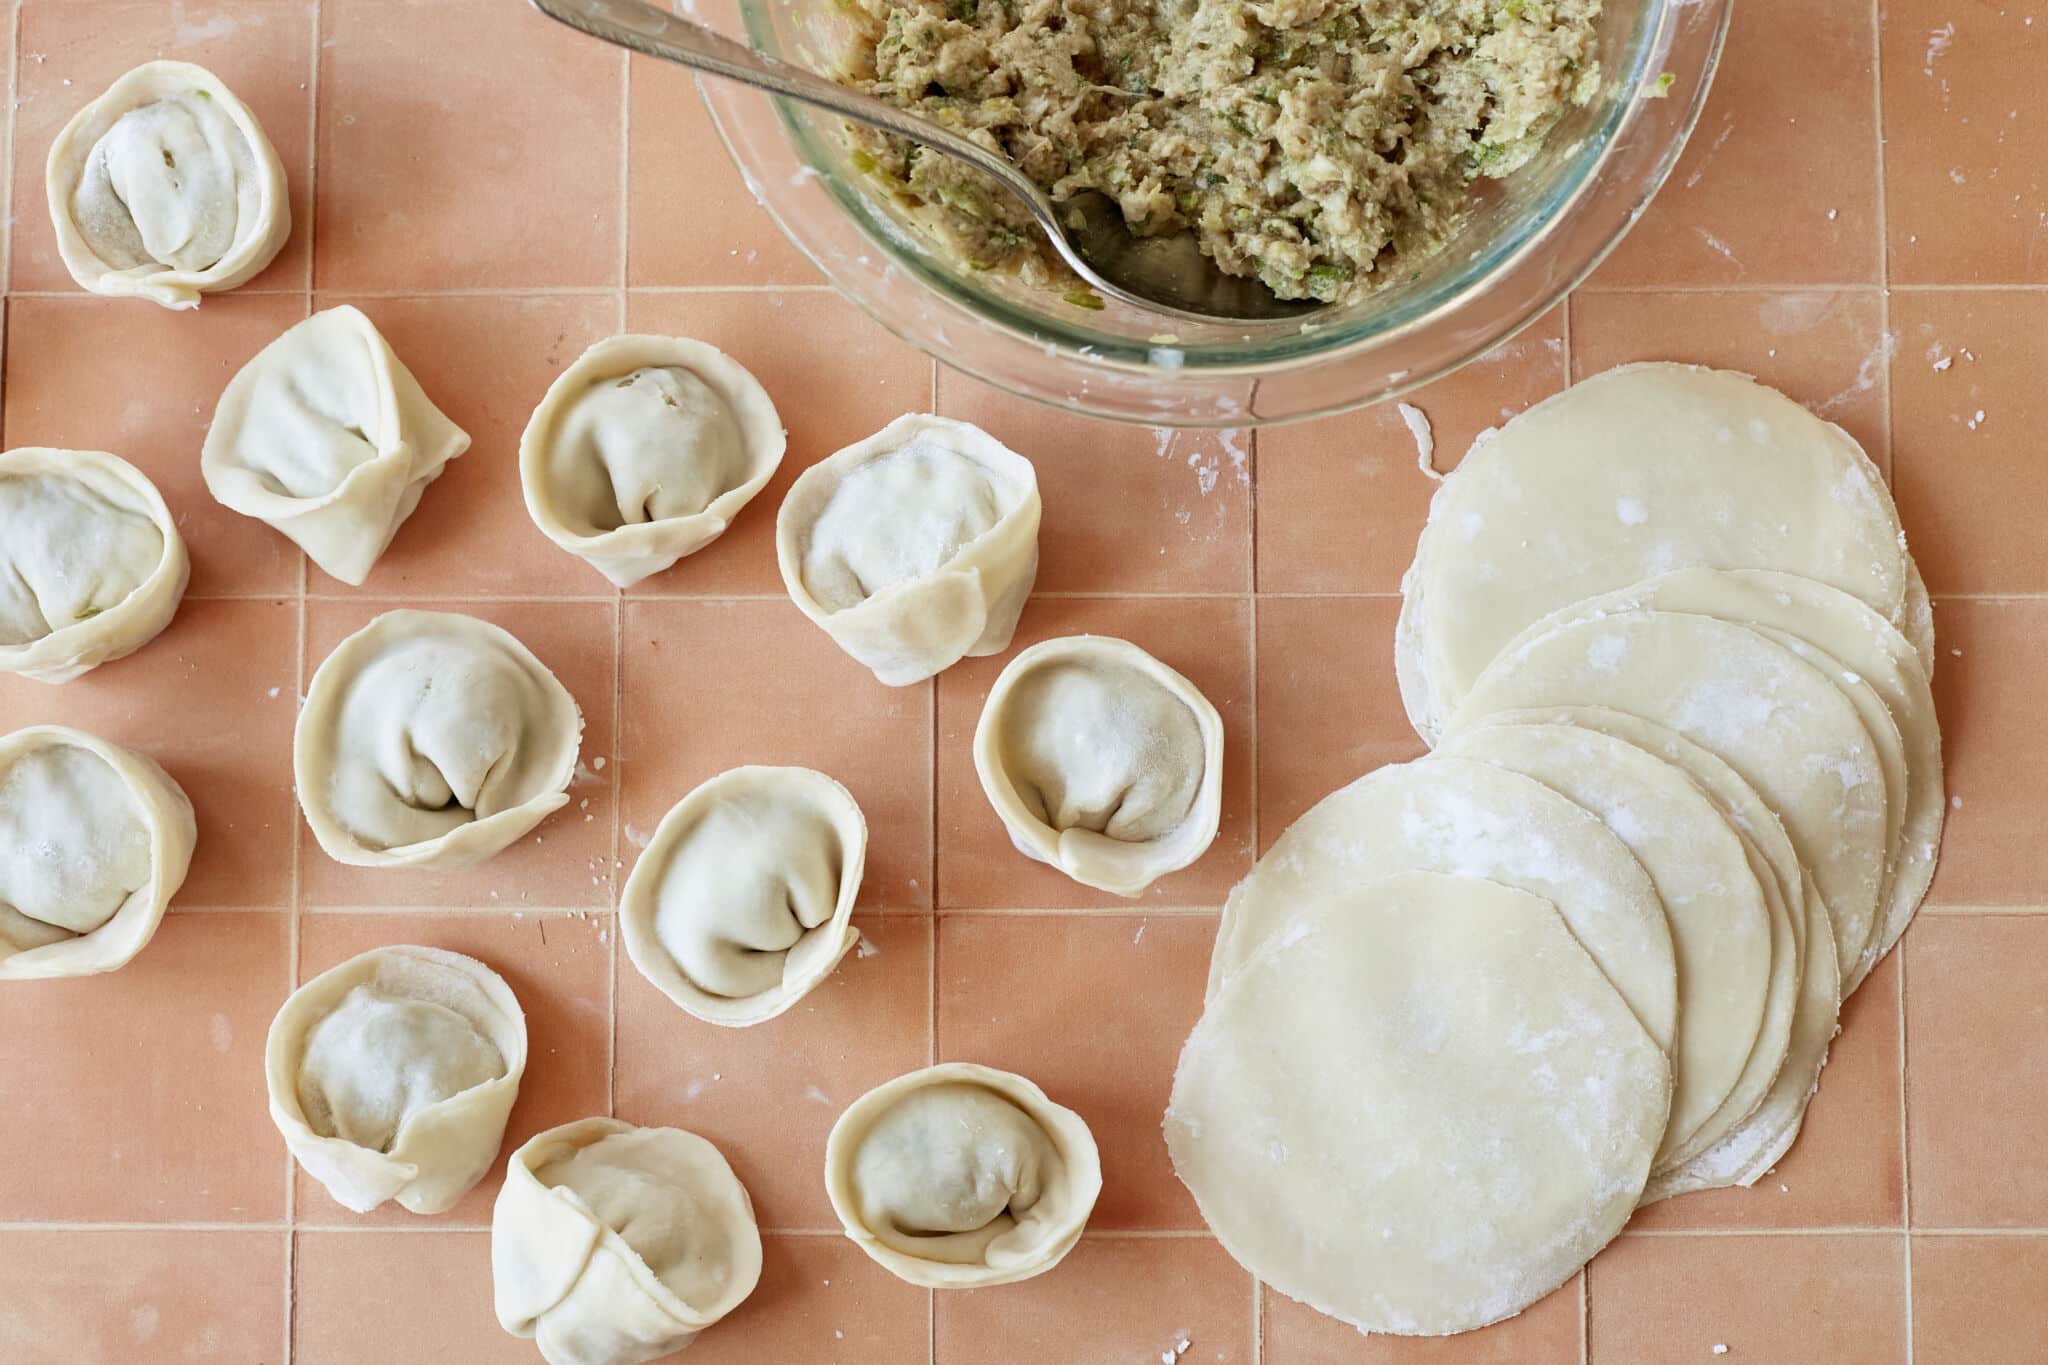 Thin, delicate Homemade Dumpling Wrappers with some dumplings. A bowl of filling is on the side.